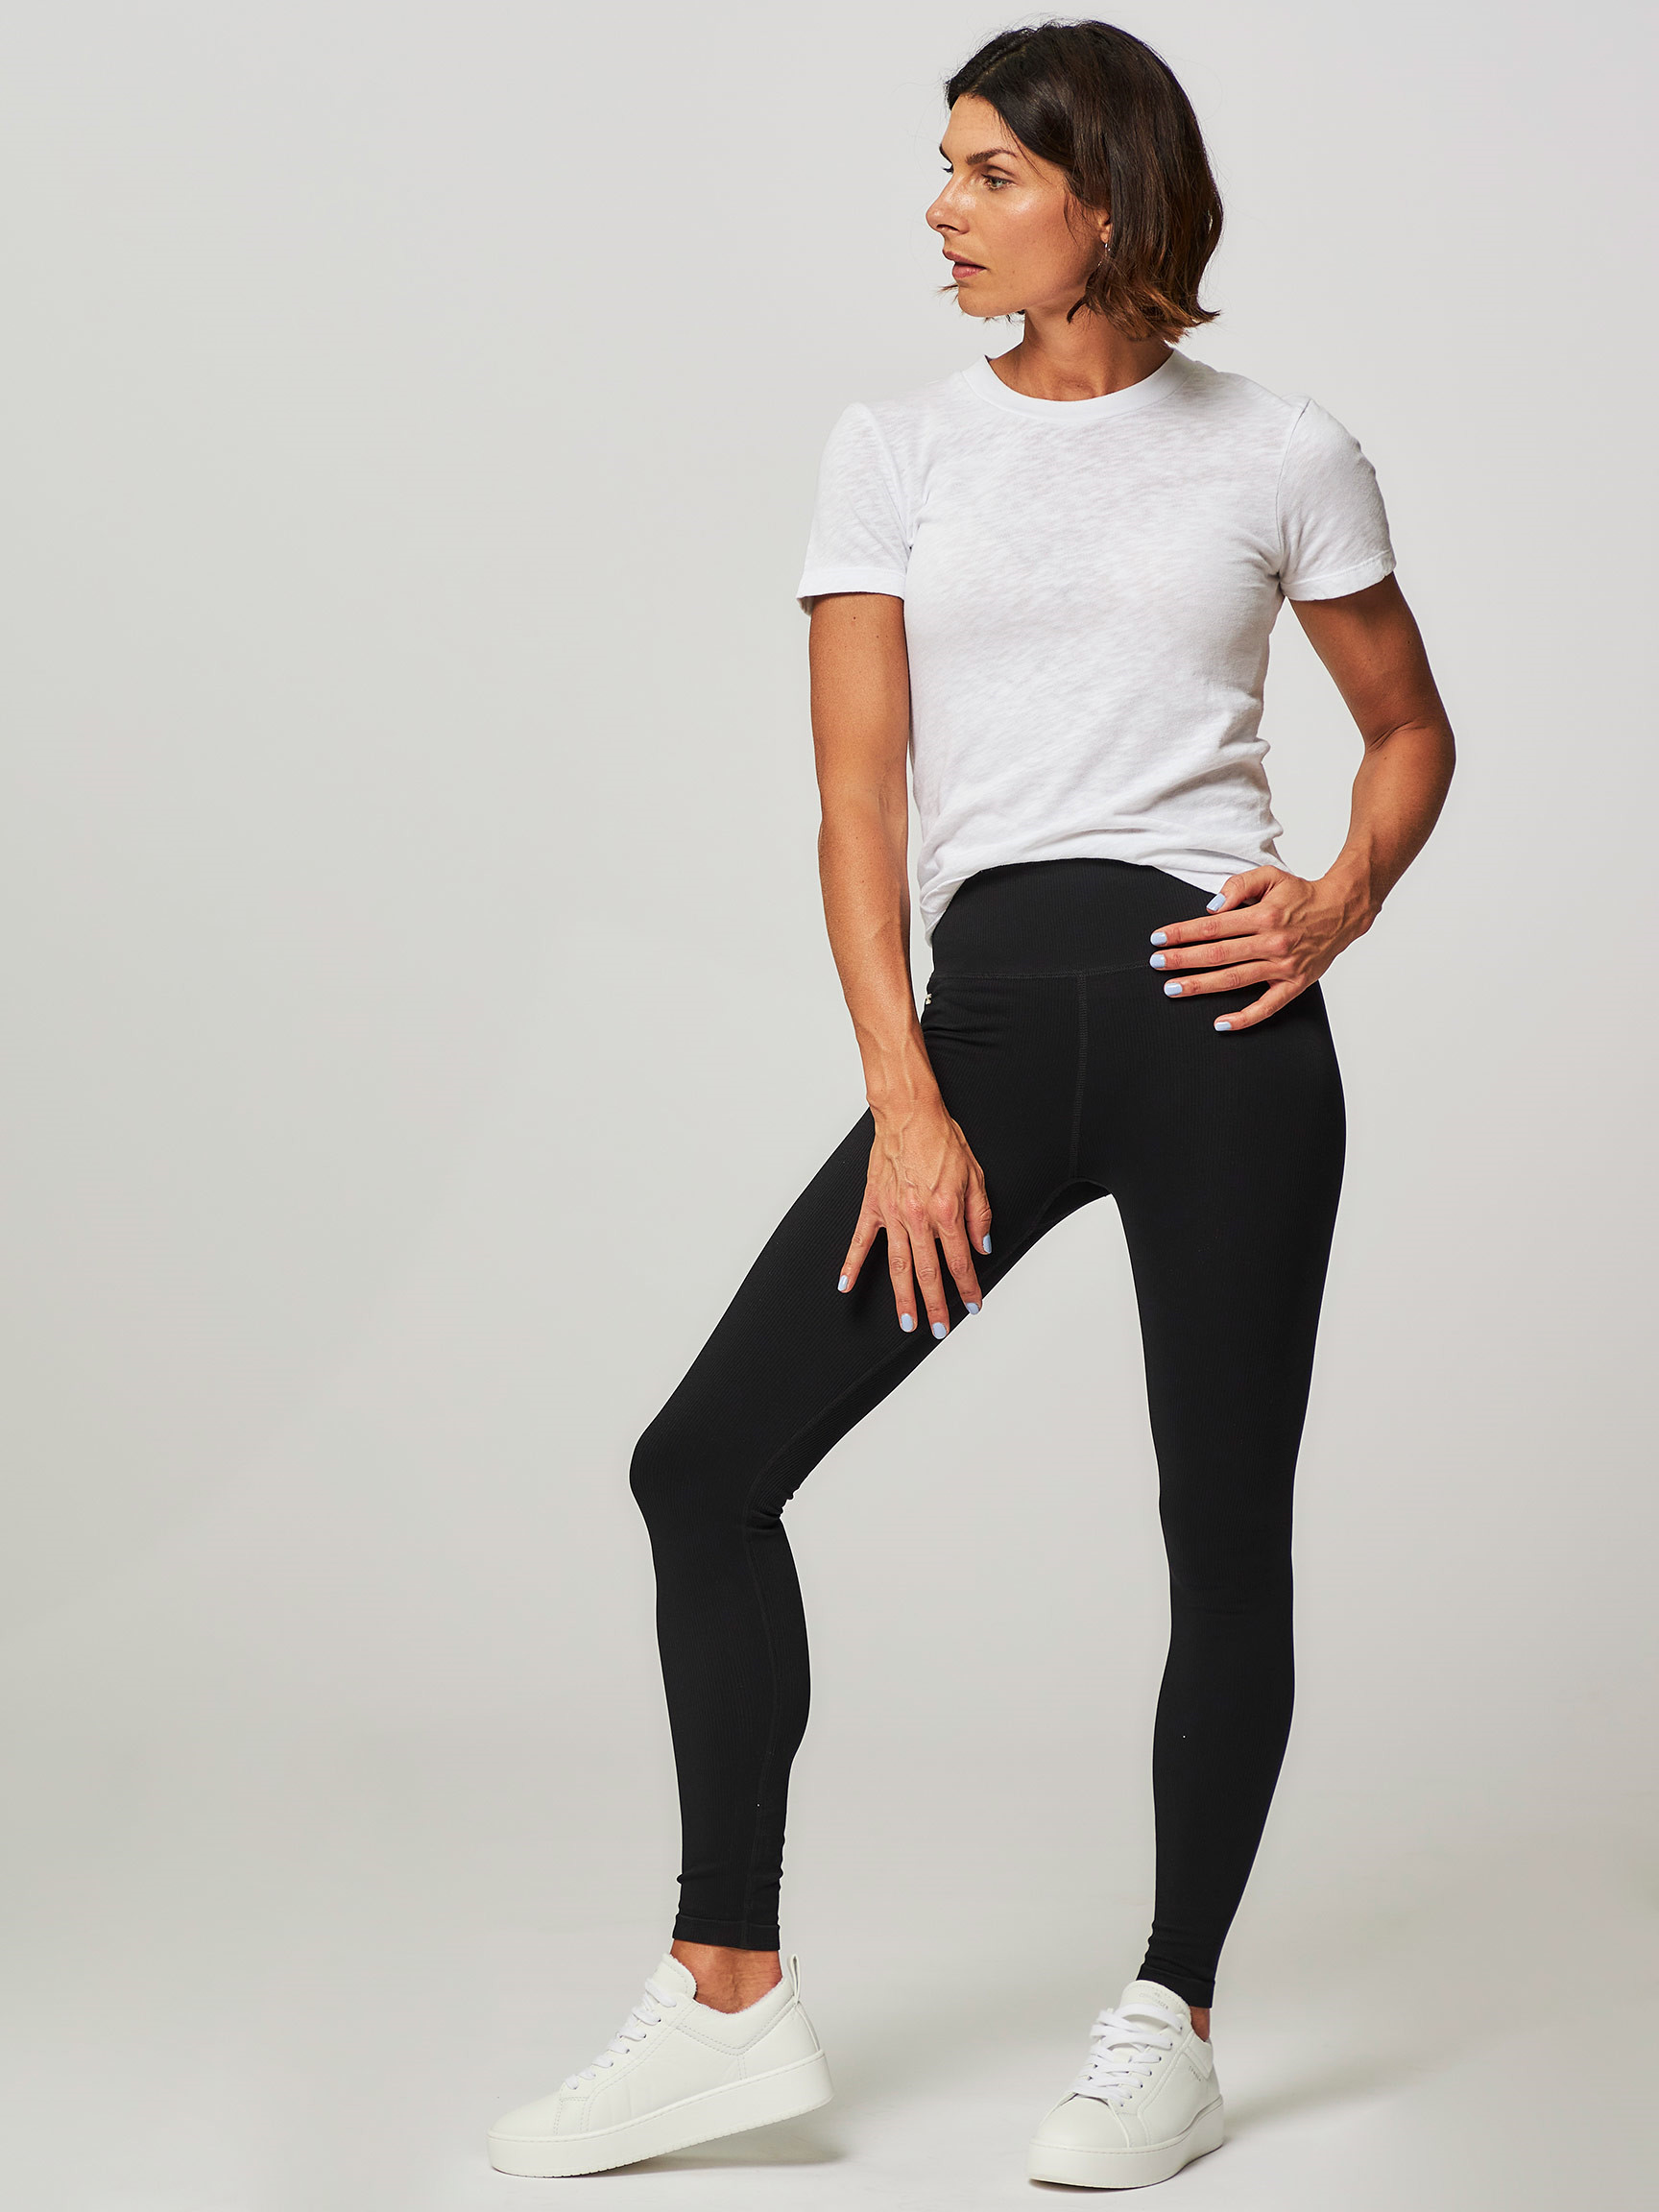 Perfect Fit Leggings - Wolford